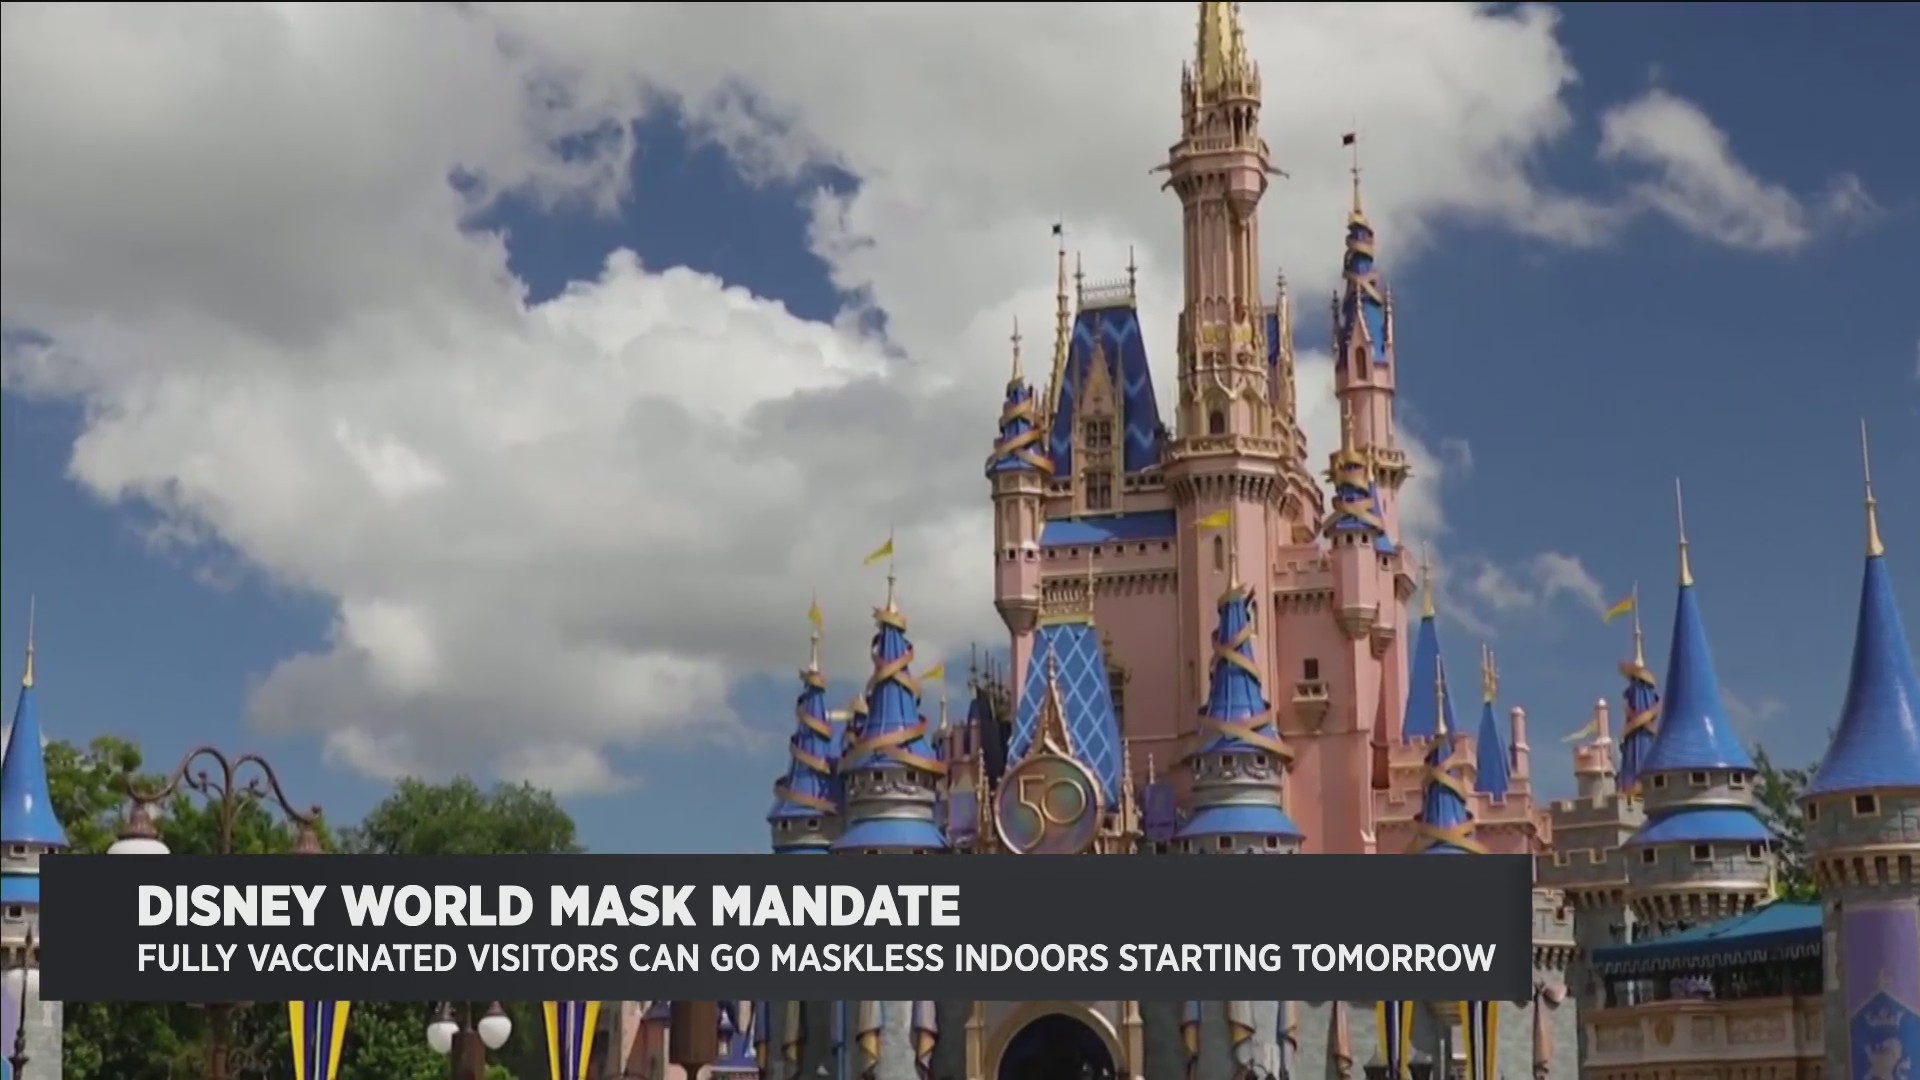 Disney World: No More Masks Indoors For Vaccinated Visitors